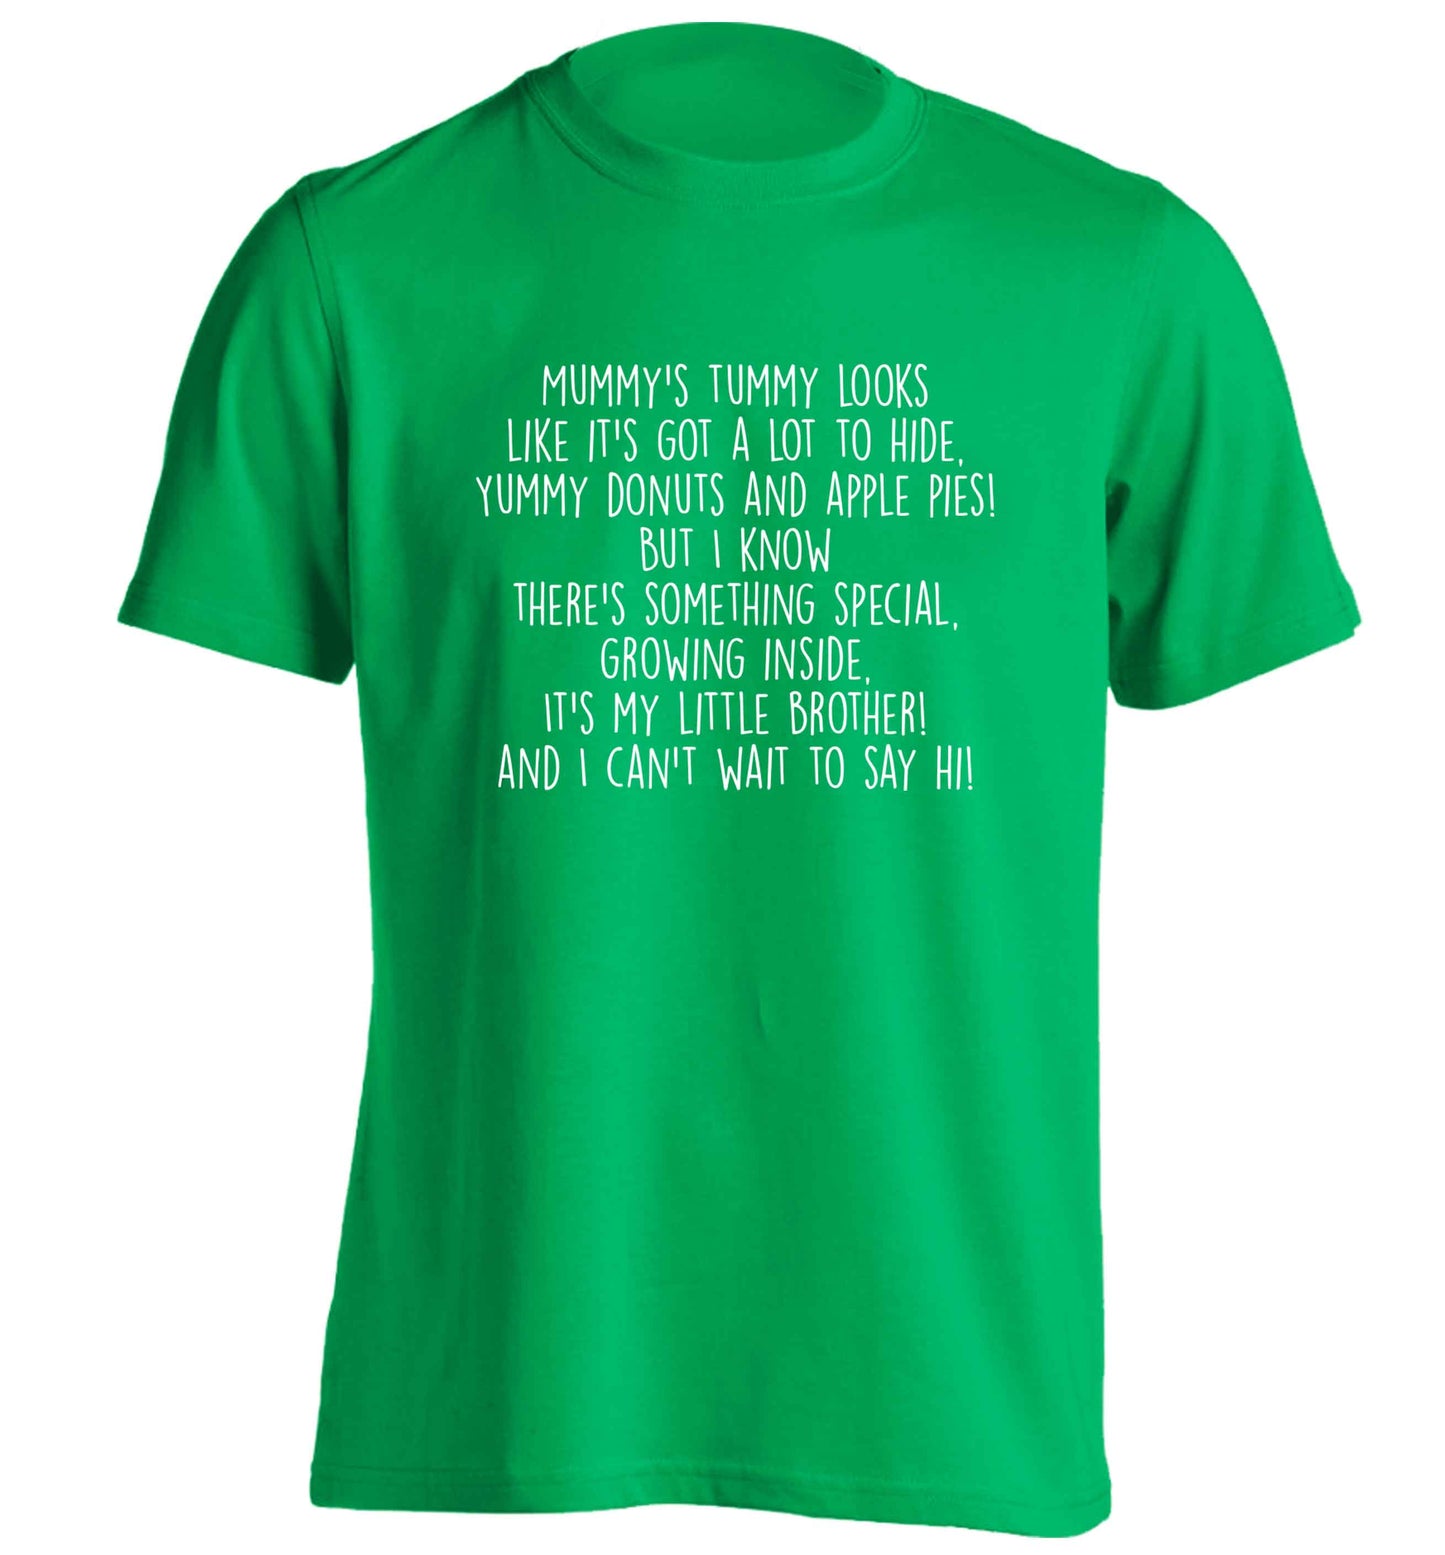 Something special growing inside it's my little brother I can't wait to say hi! adults unisex green Tshirt 2XL